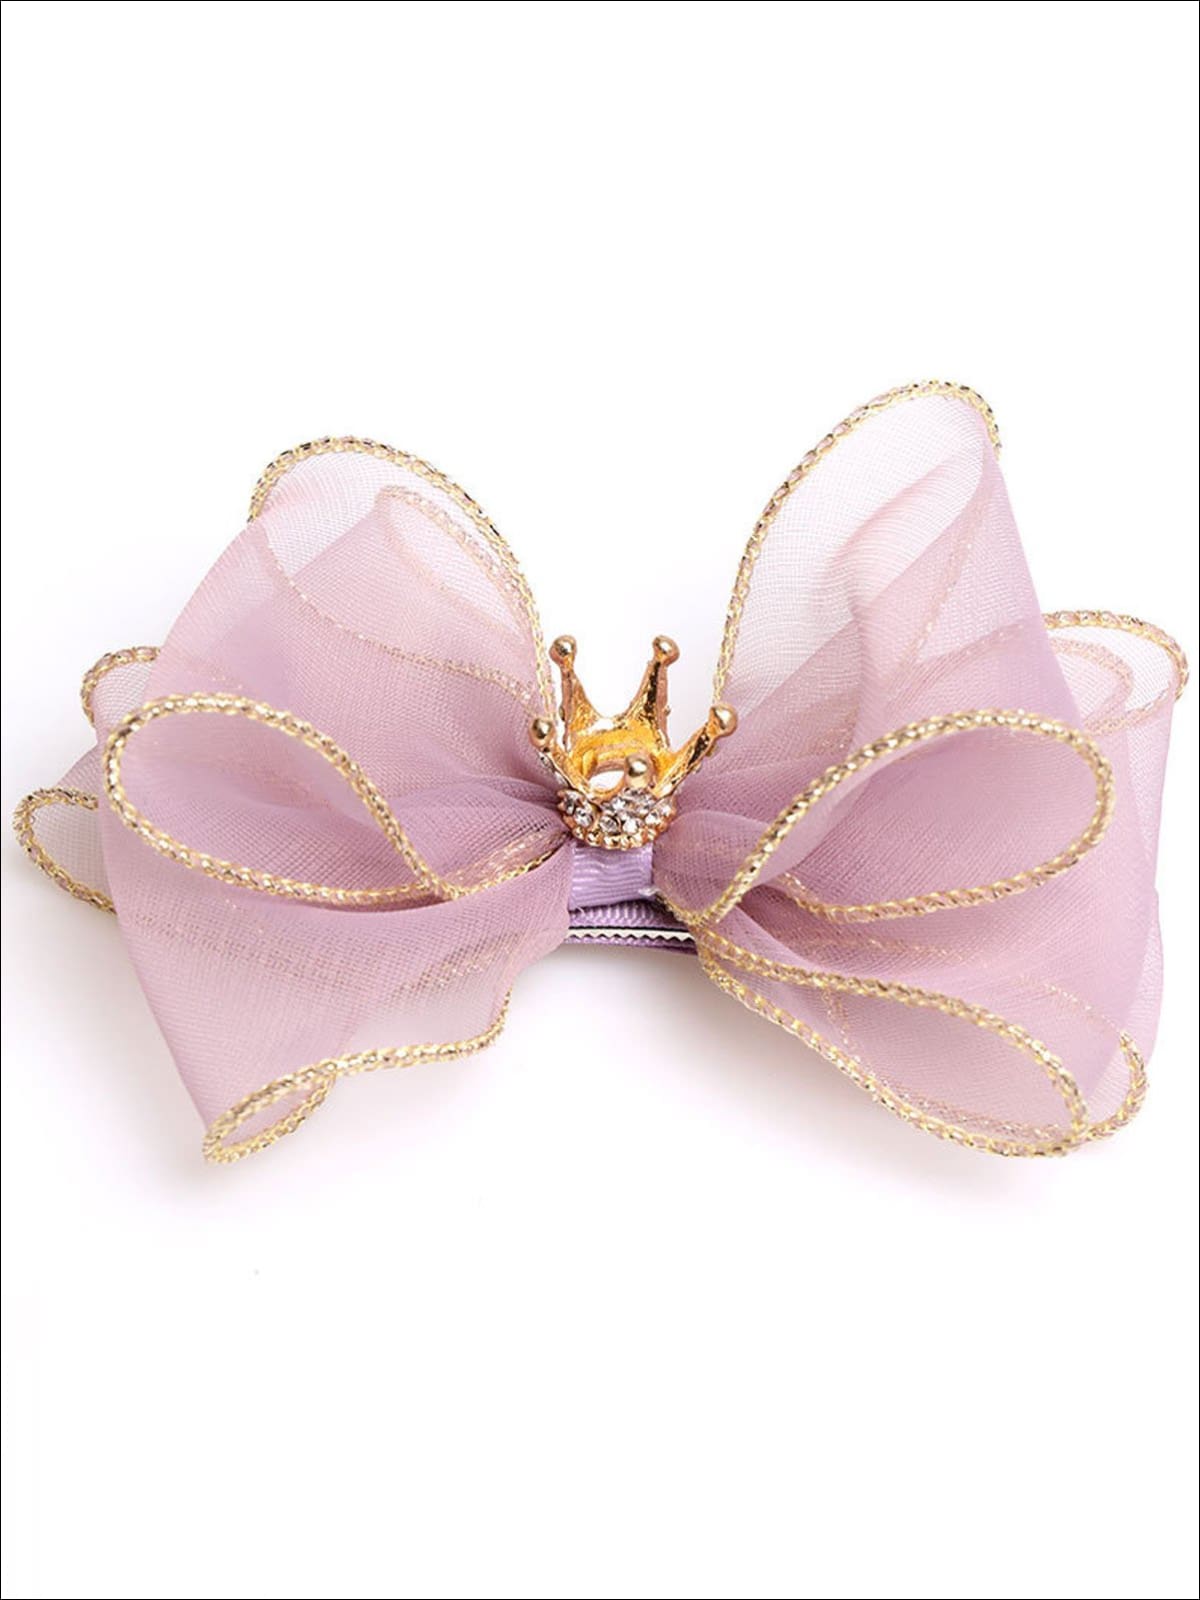 Girls Bow and Rhinestone Embellished Crown Hair Clip – Mia Belle Girls